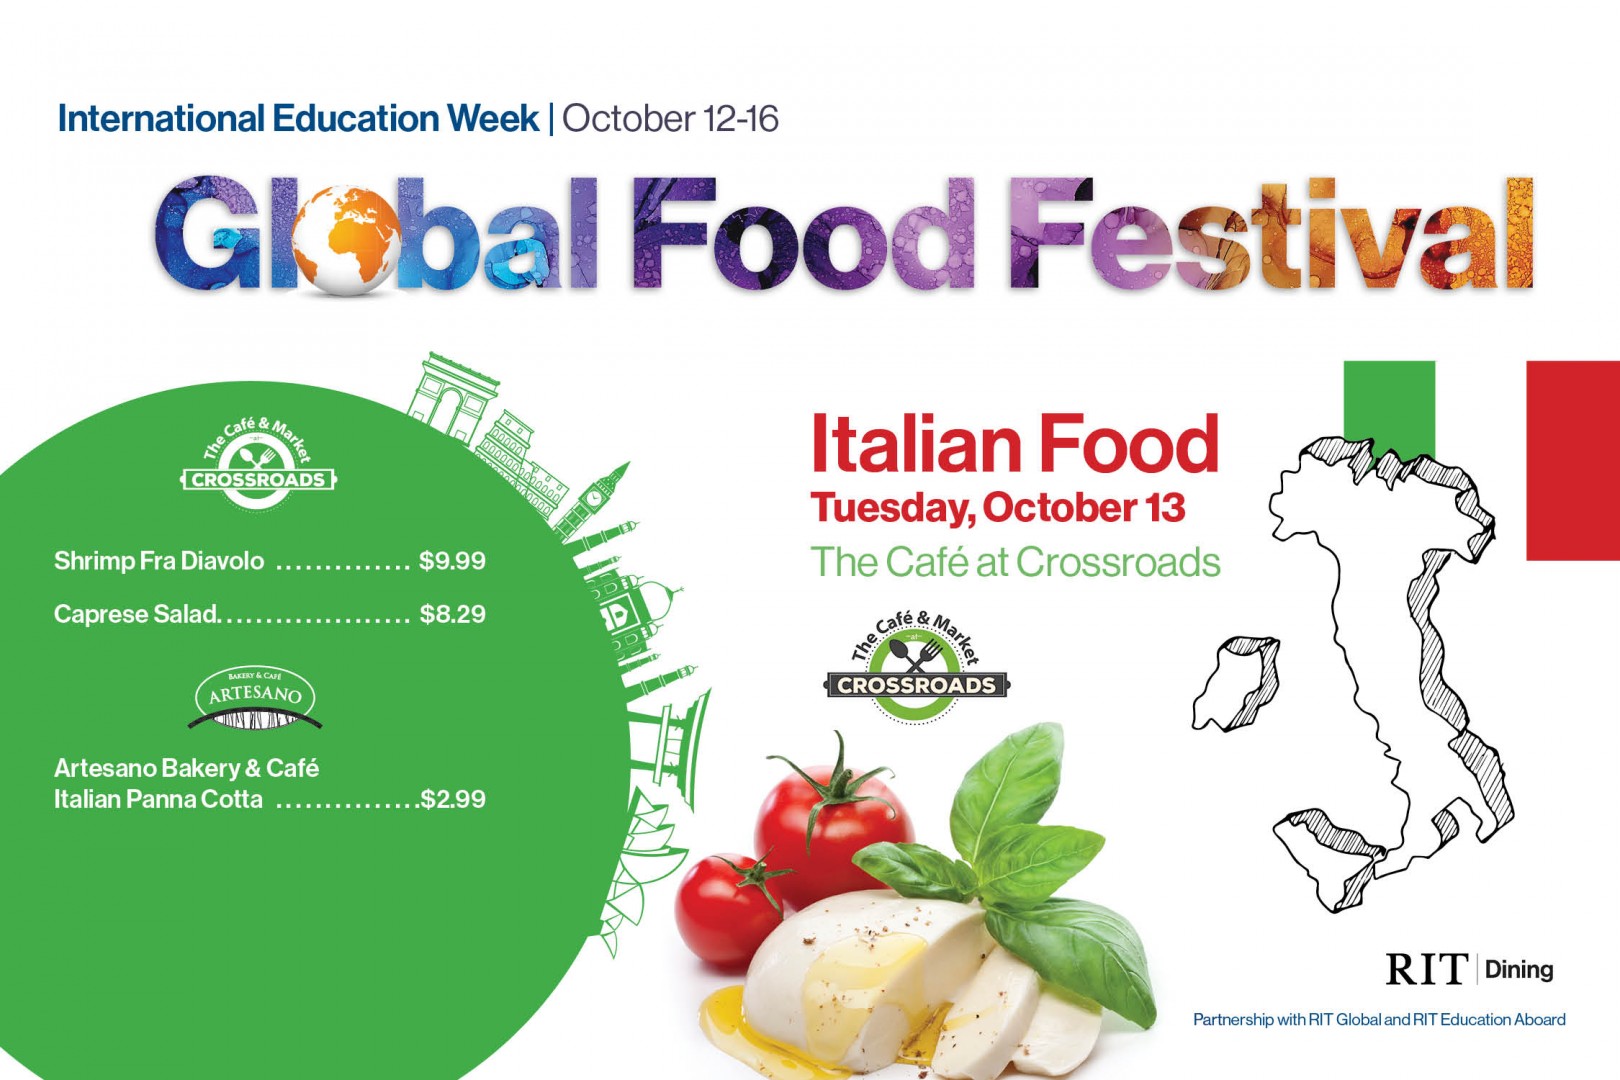 Graphic with text "Global Food Festival", "Italian Food", and outline of country